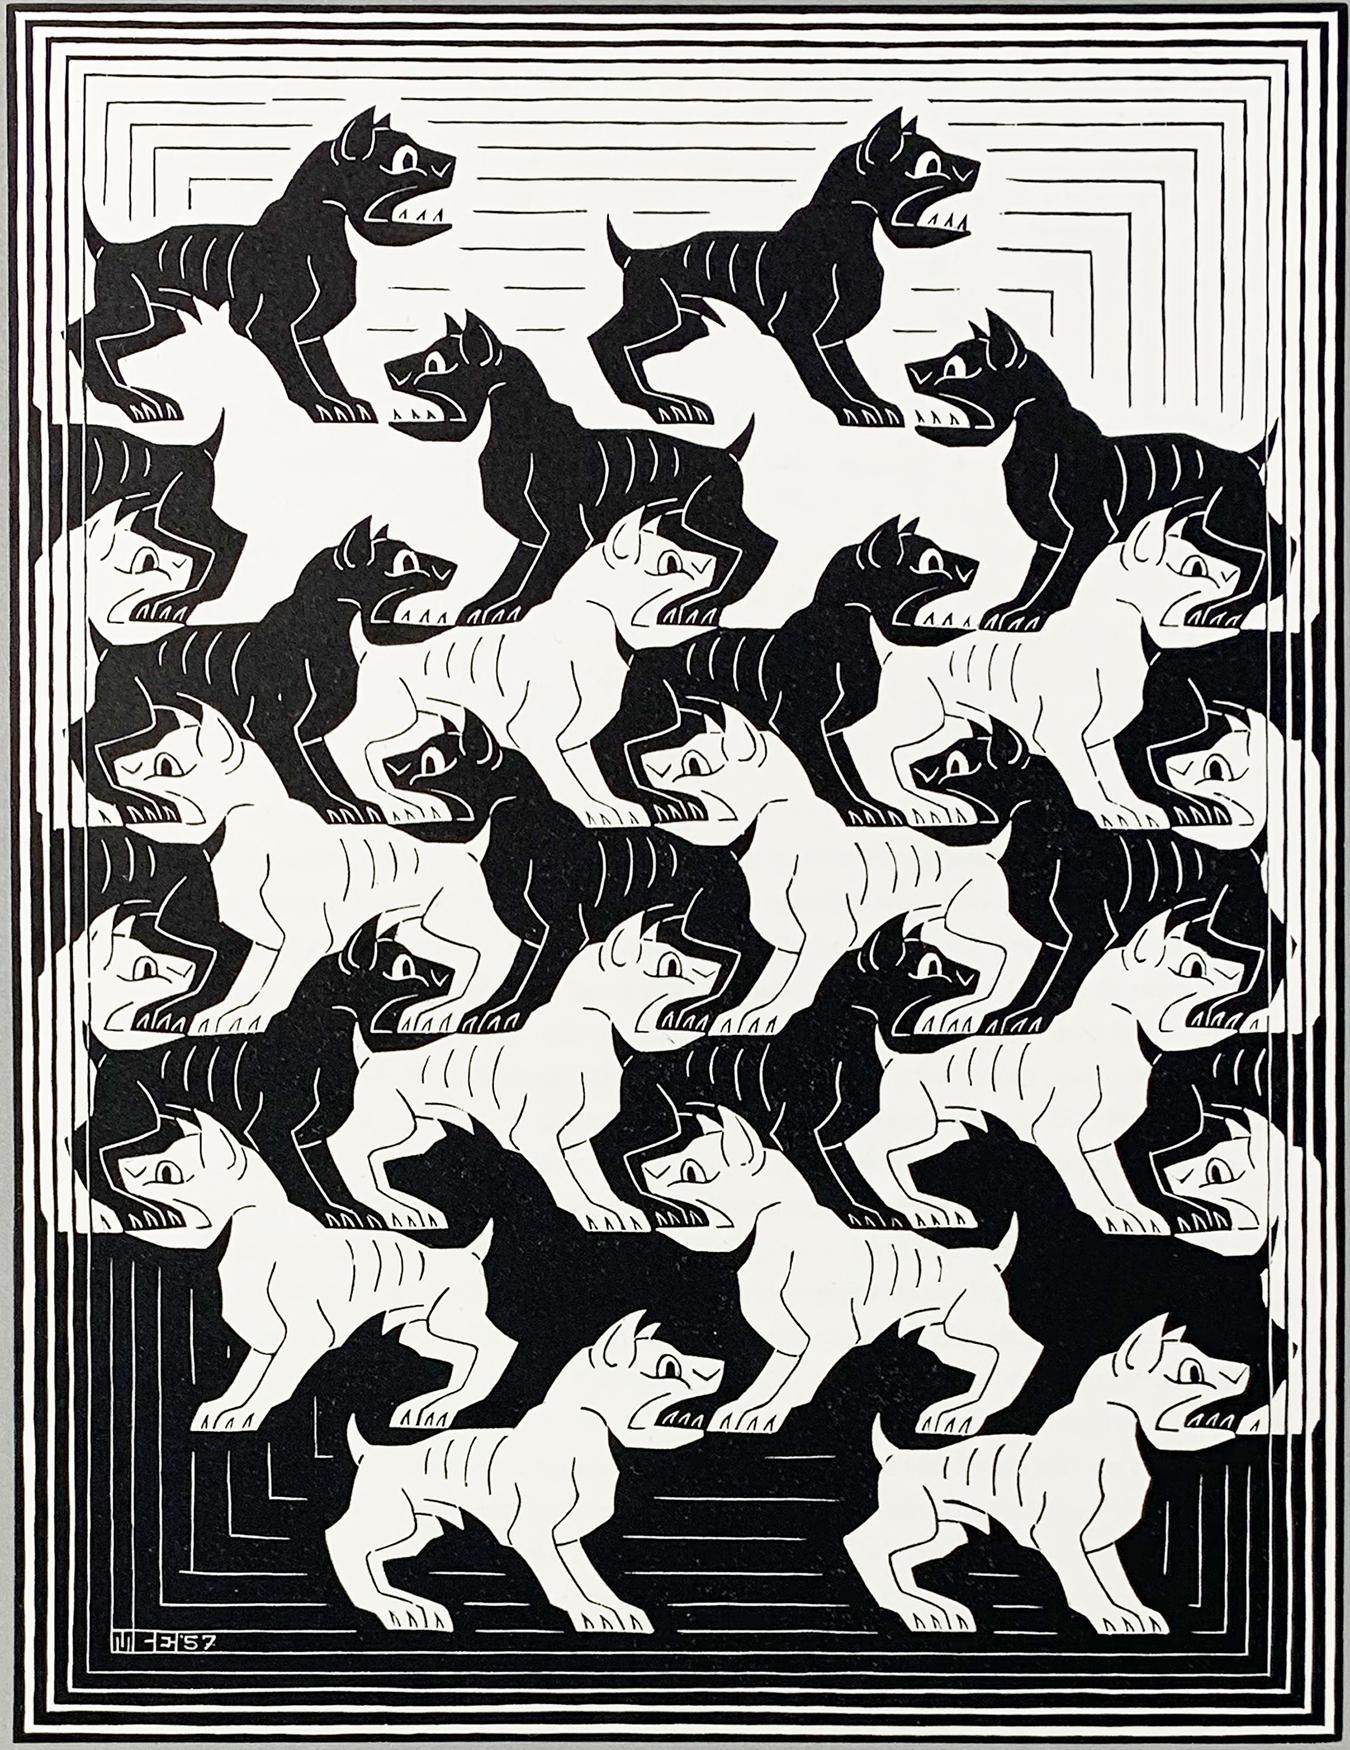 Regular Division of the Plane IV "Dogs" - Print by M.C. Escher